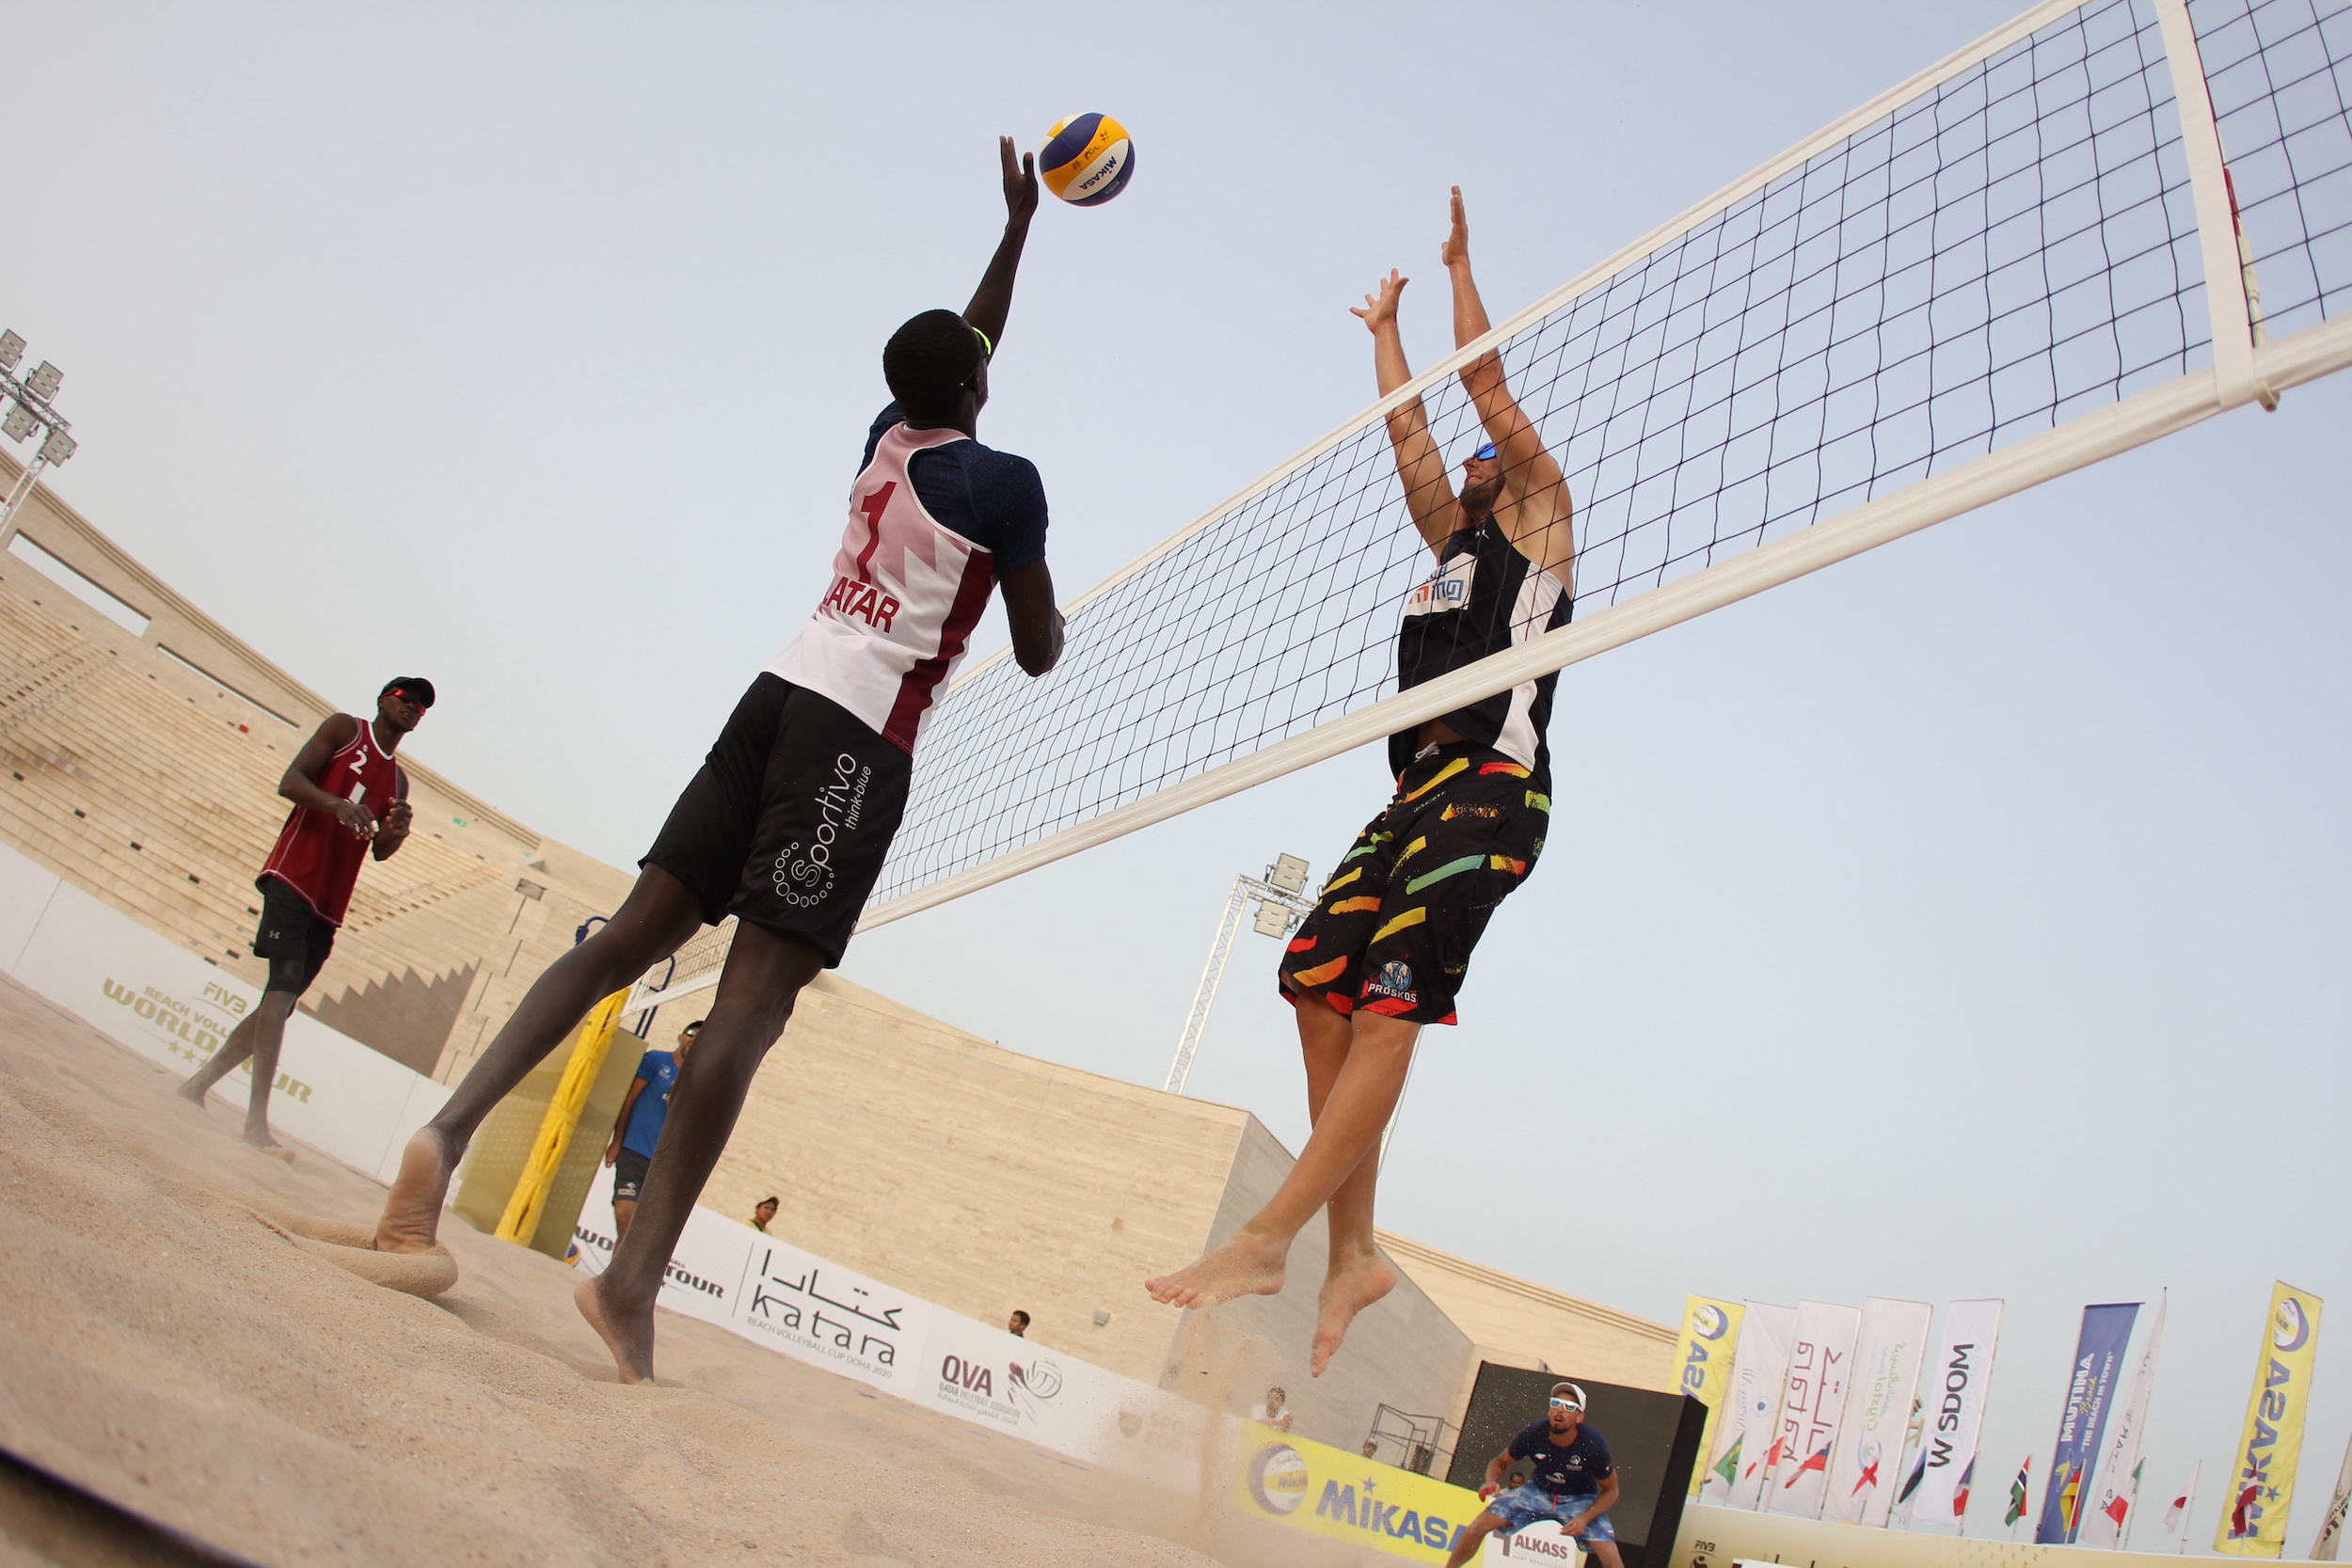 Doha to host first international volleyball championships